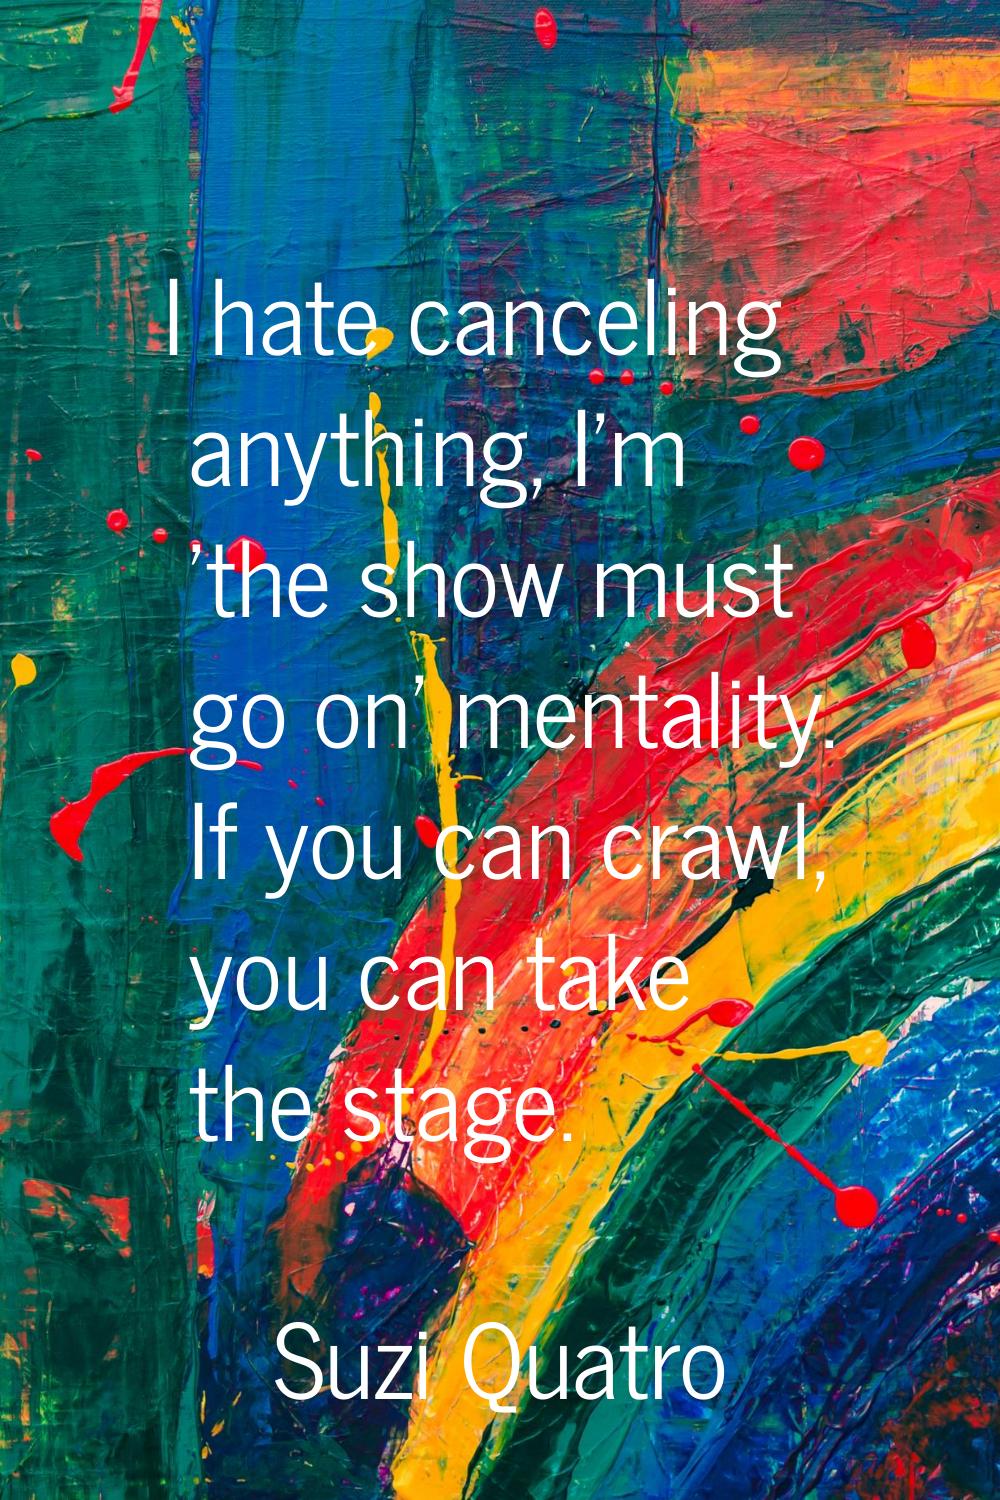 I hate canceling anything, I'm 'the show must go on' mentality. If you can crawl, you can take the 